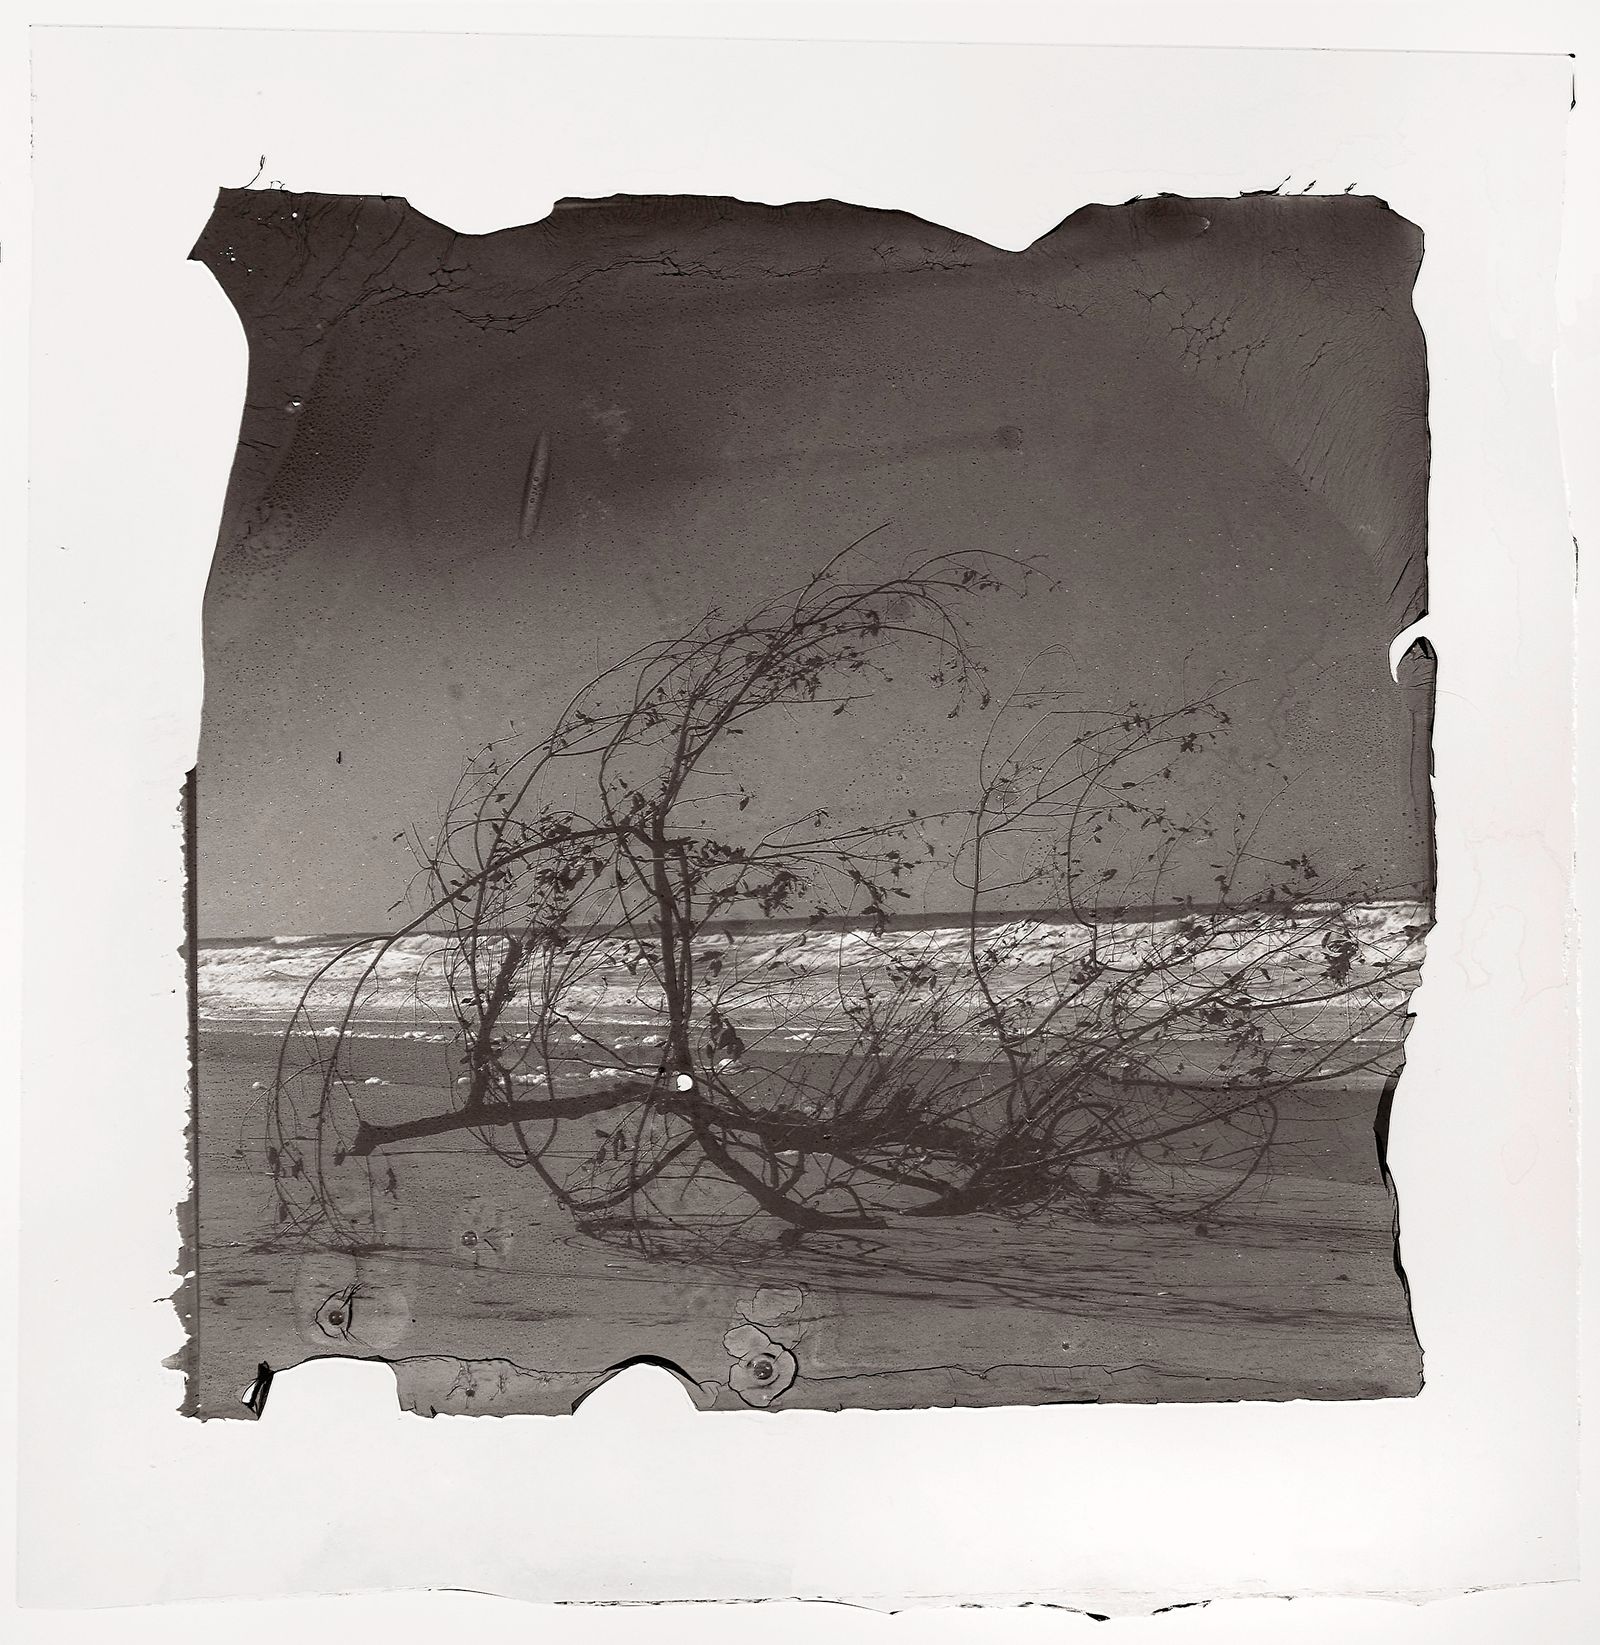 © Sarah Grew - On the beach arrive a few fallen branches and burned trees that have travelled down the rivers to meet the sea.